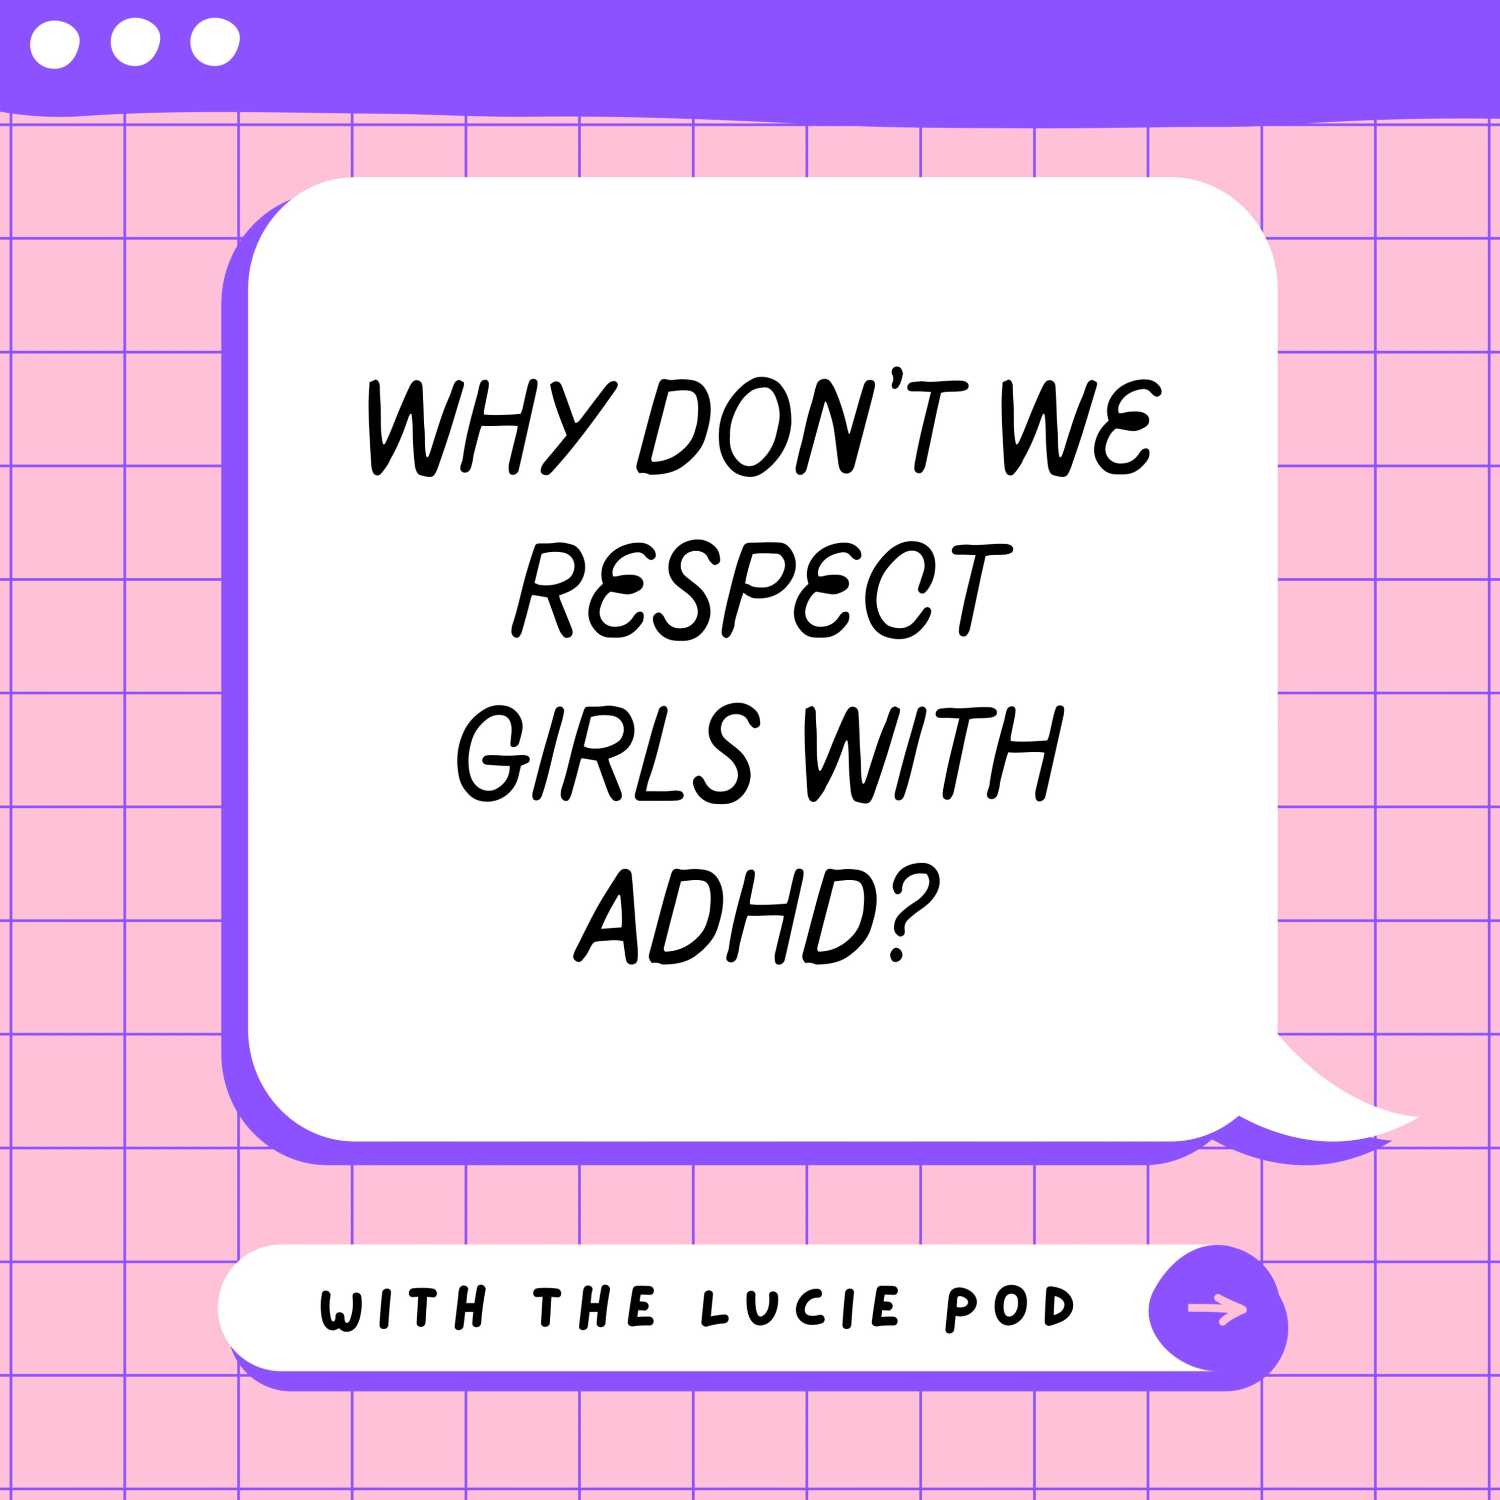 Why don’t we respect girls with ADHD?